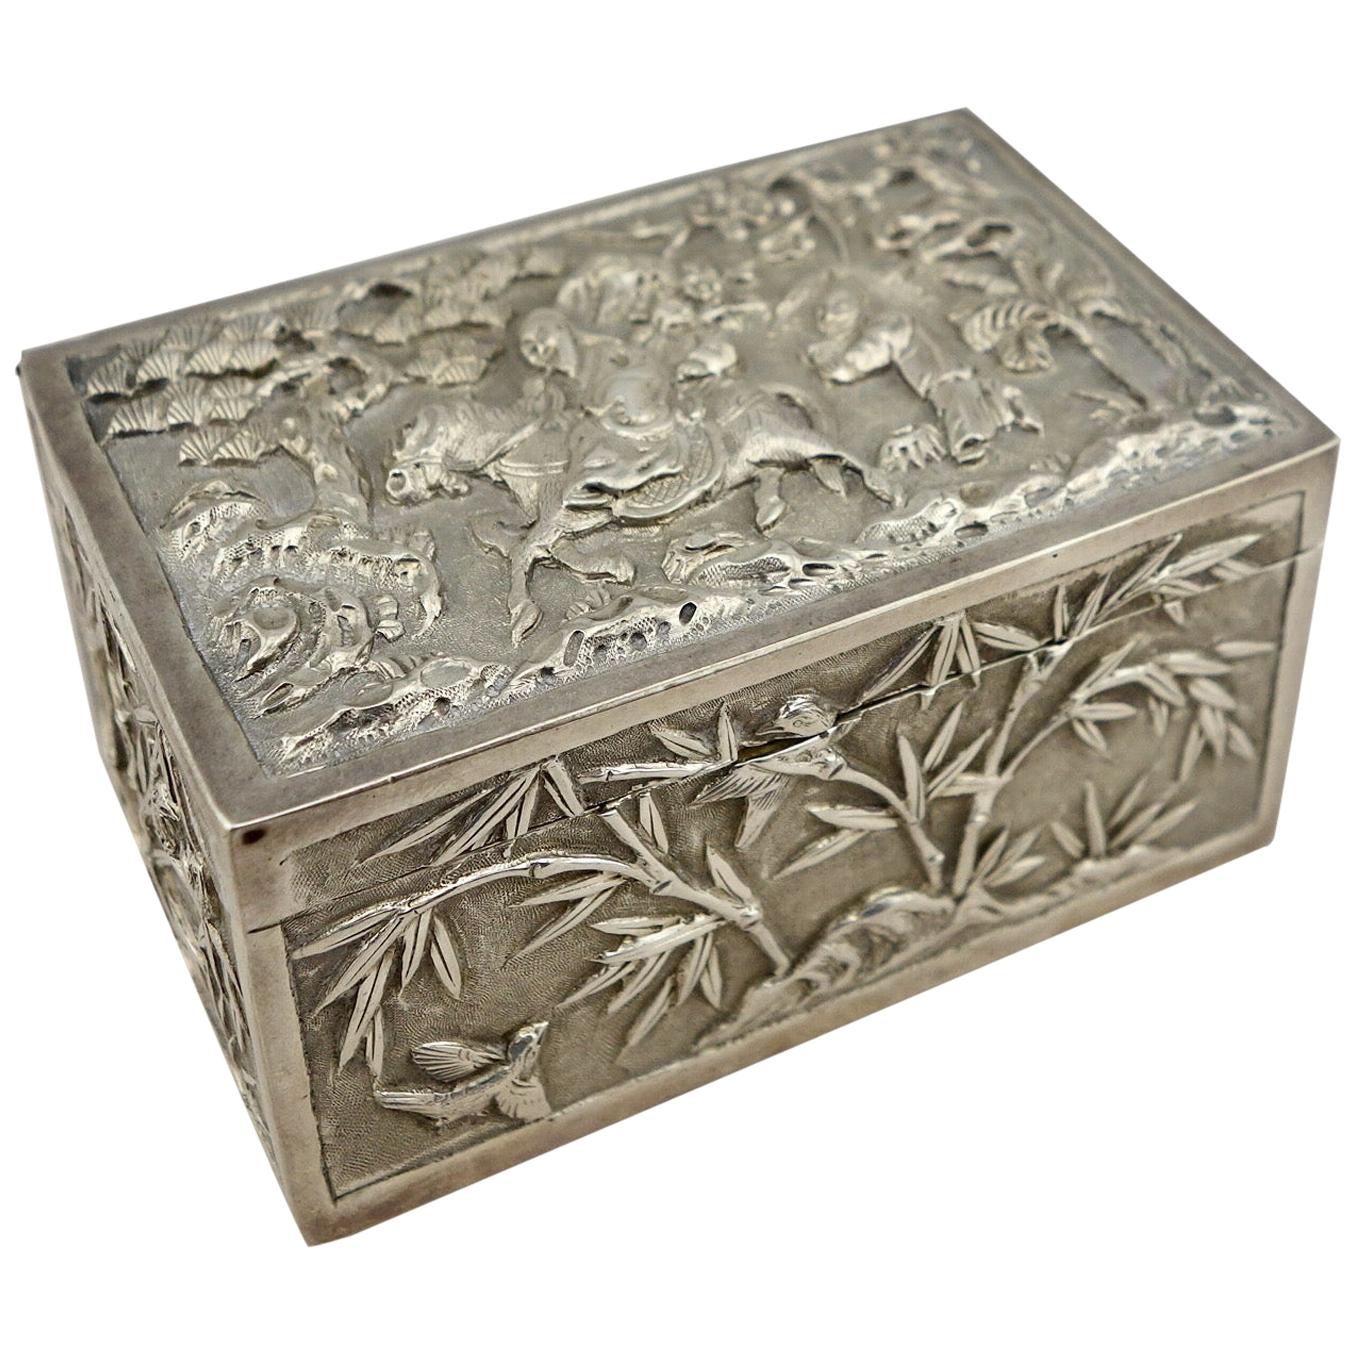 Chinese Export Silver Repousse Scenic Box by Wang Hing, circa 1870